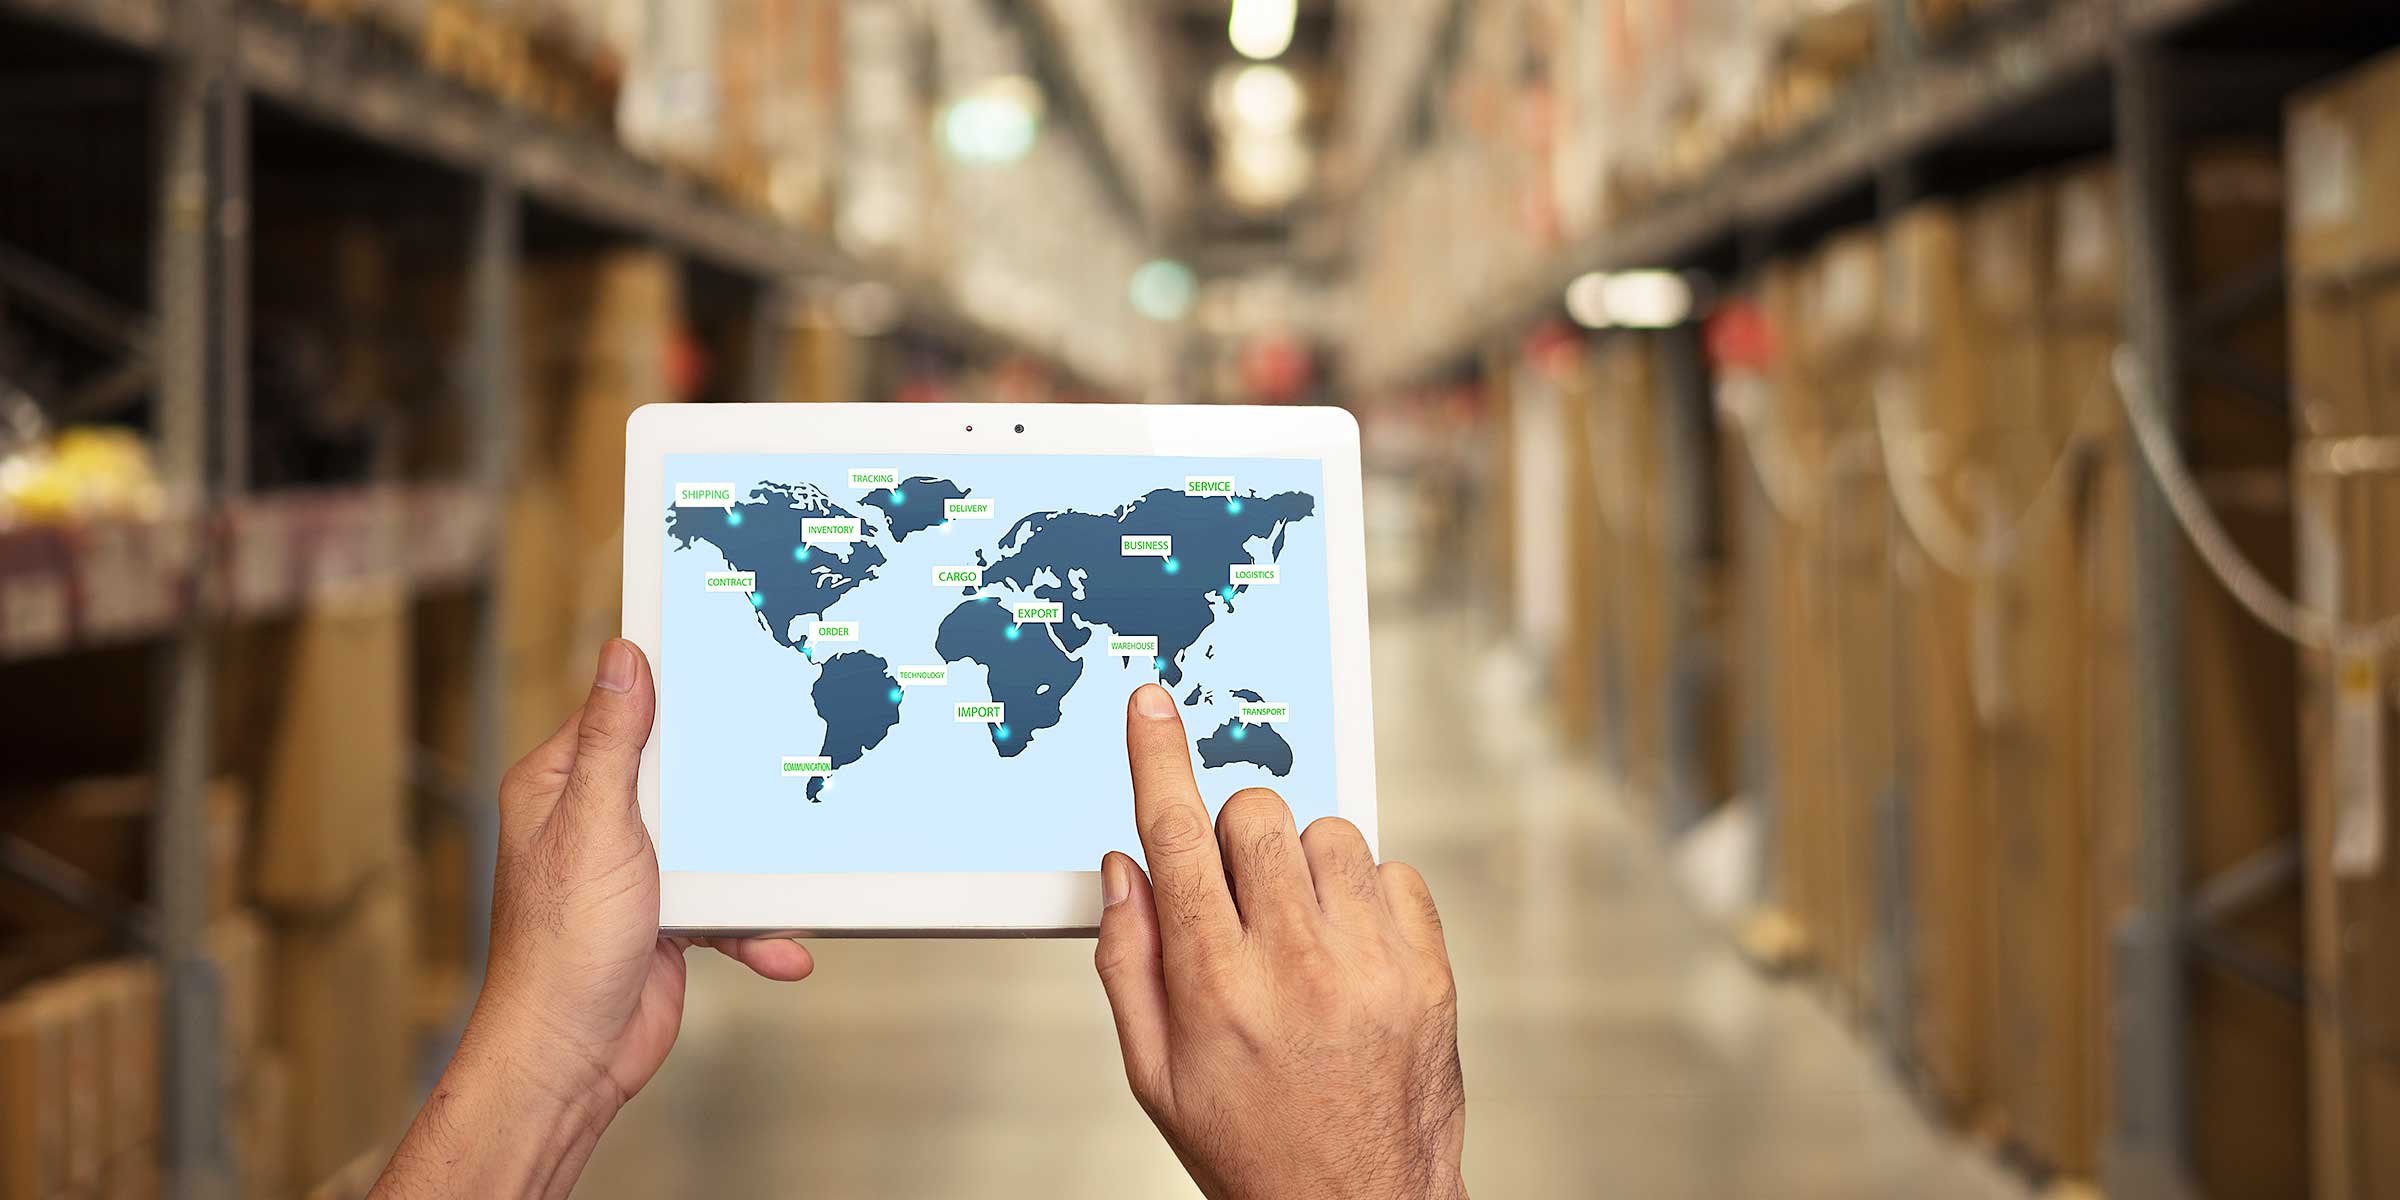 What should an e-commerce business consider before “going global”?